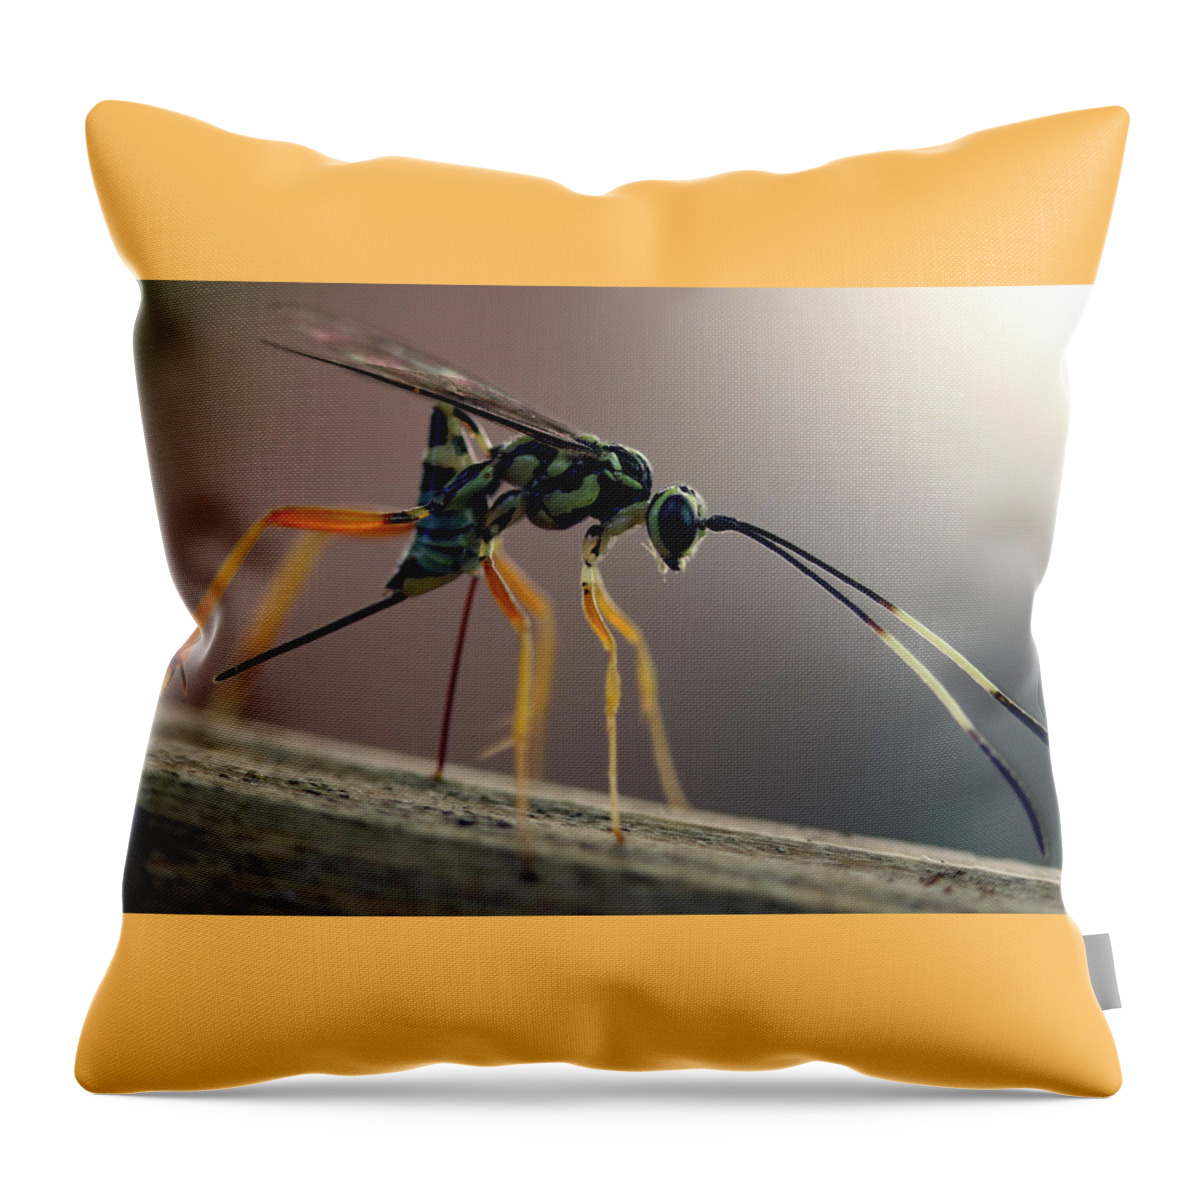 Insects Throw Pillow featuring the photograph Long Legged Alien by Jennifer Robin